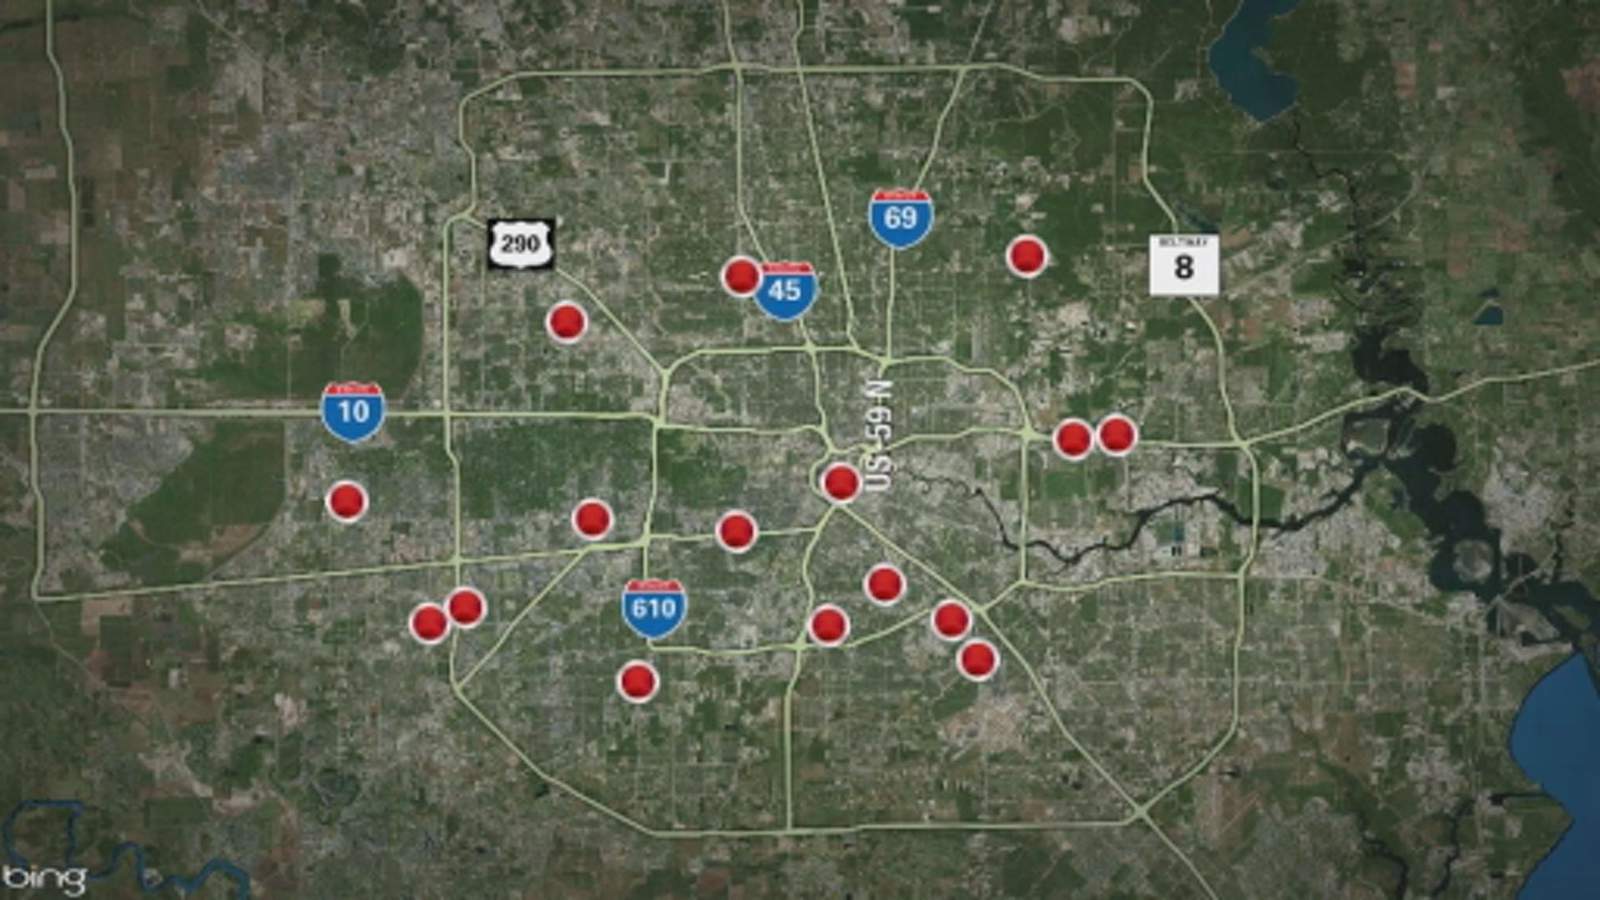 17 people shot this weekend in Houston, including four teenagers